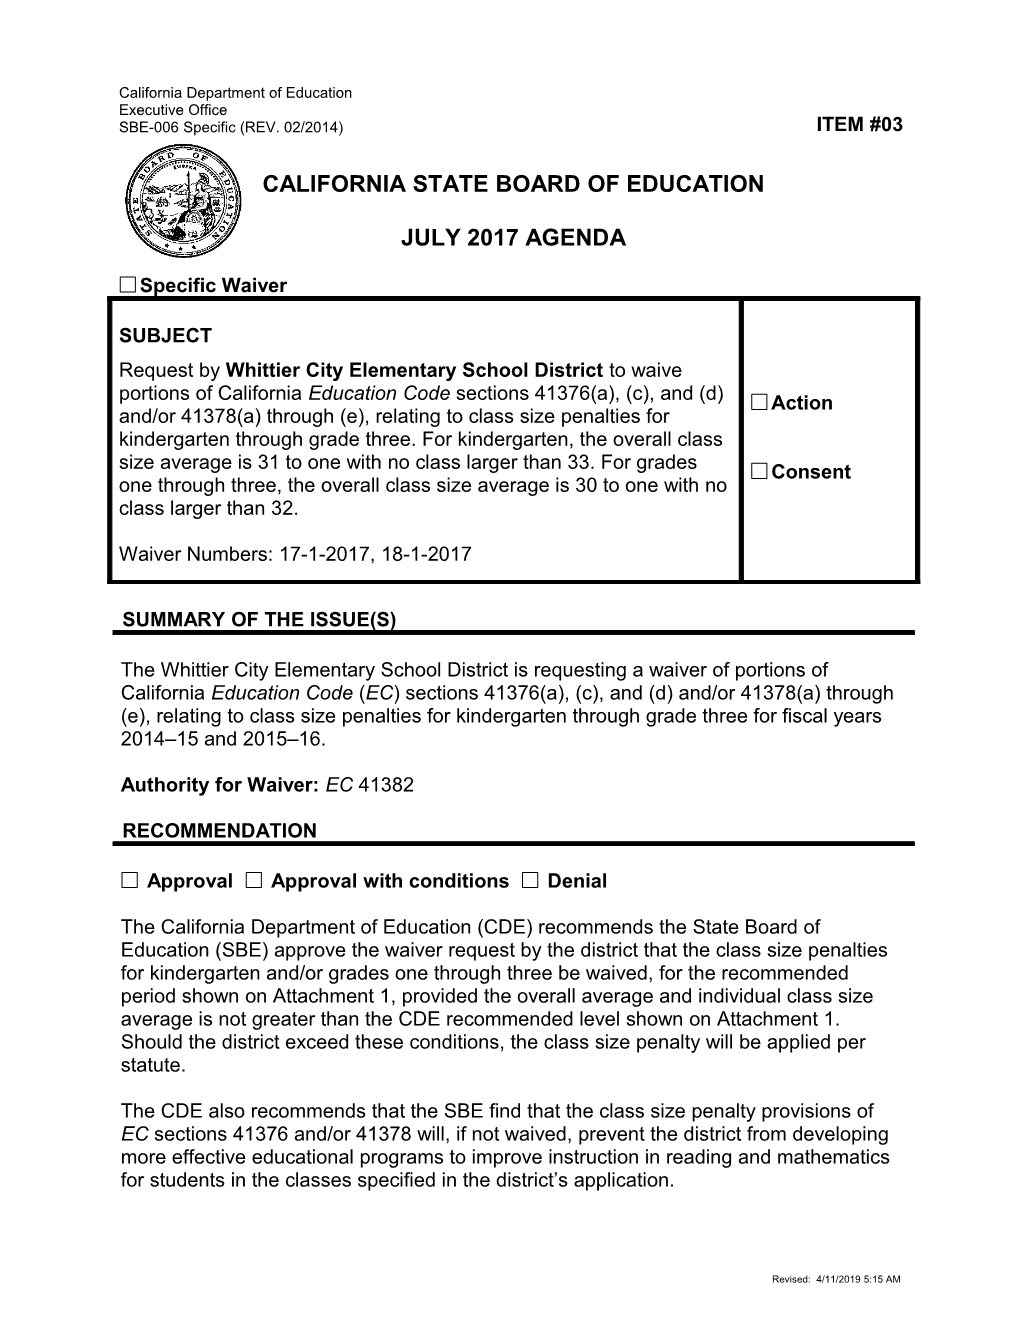 July 2017 Waiver Item W-03 - Meeting Agendas (CA State Board of Education)